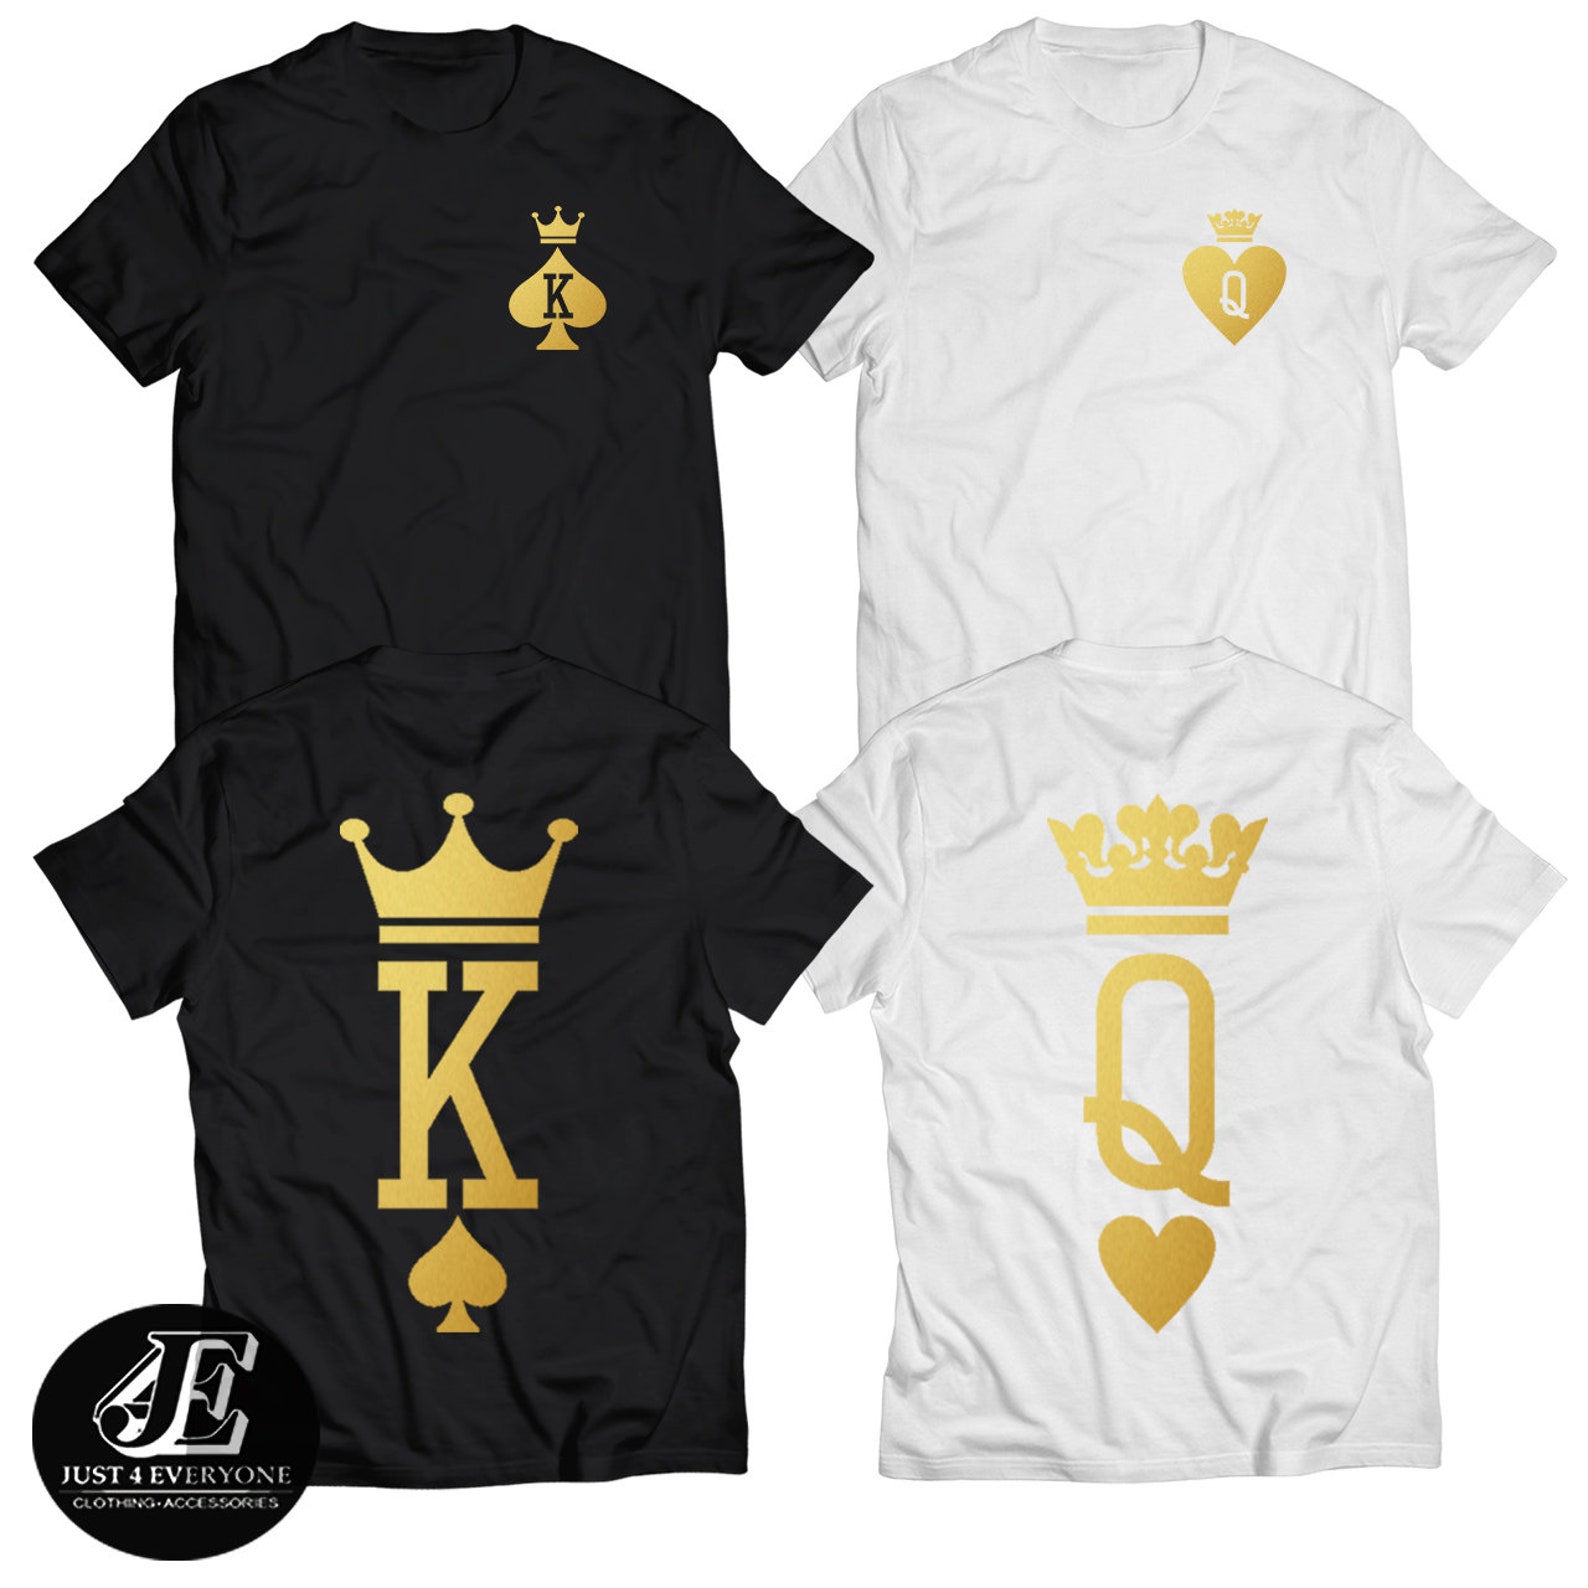 King Queen Shirts King and Queen T-shirts Couples Shirts - Etsy